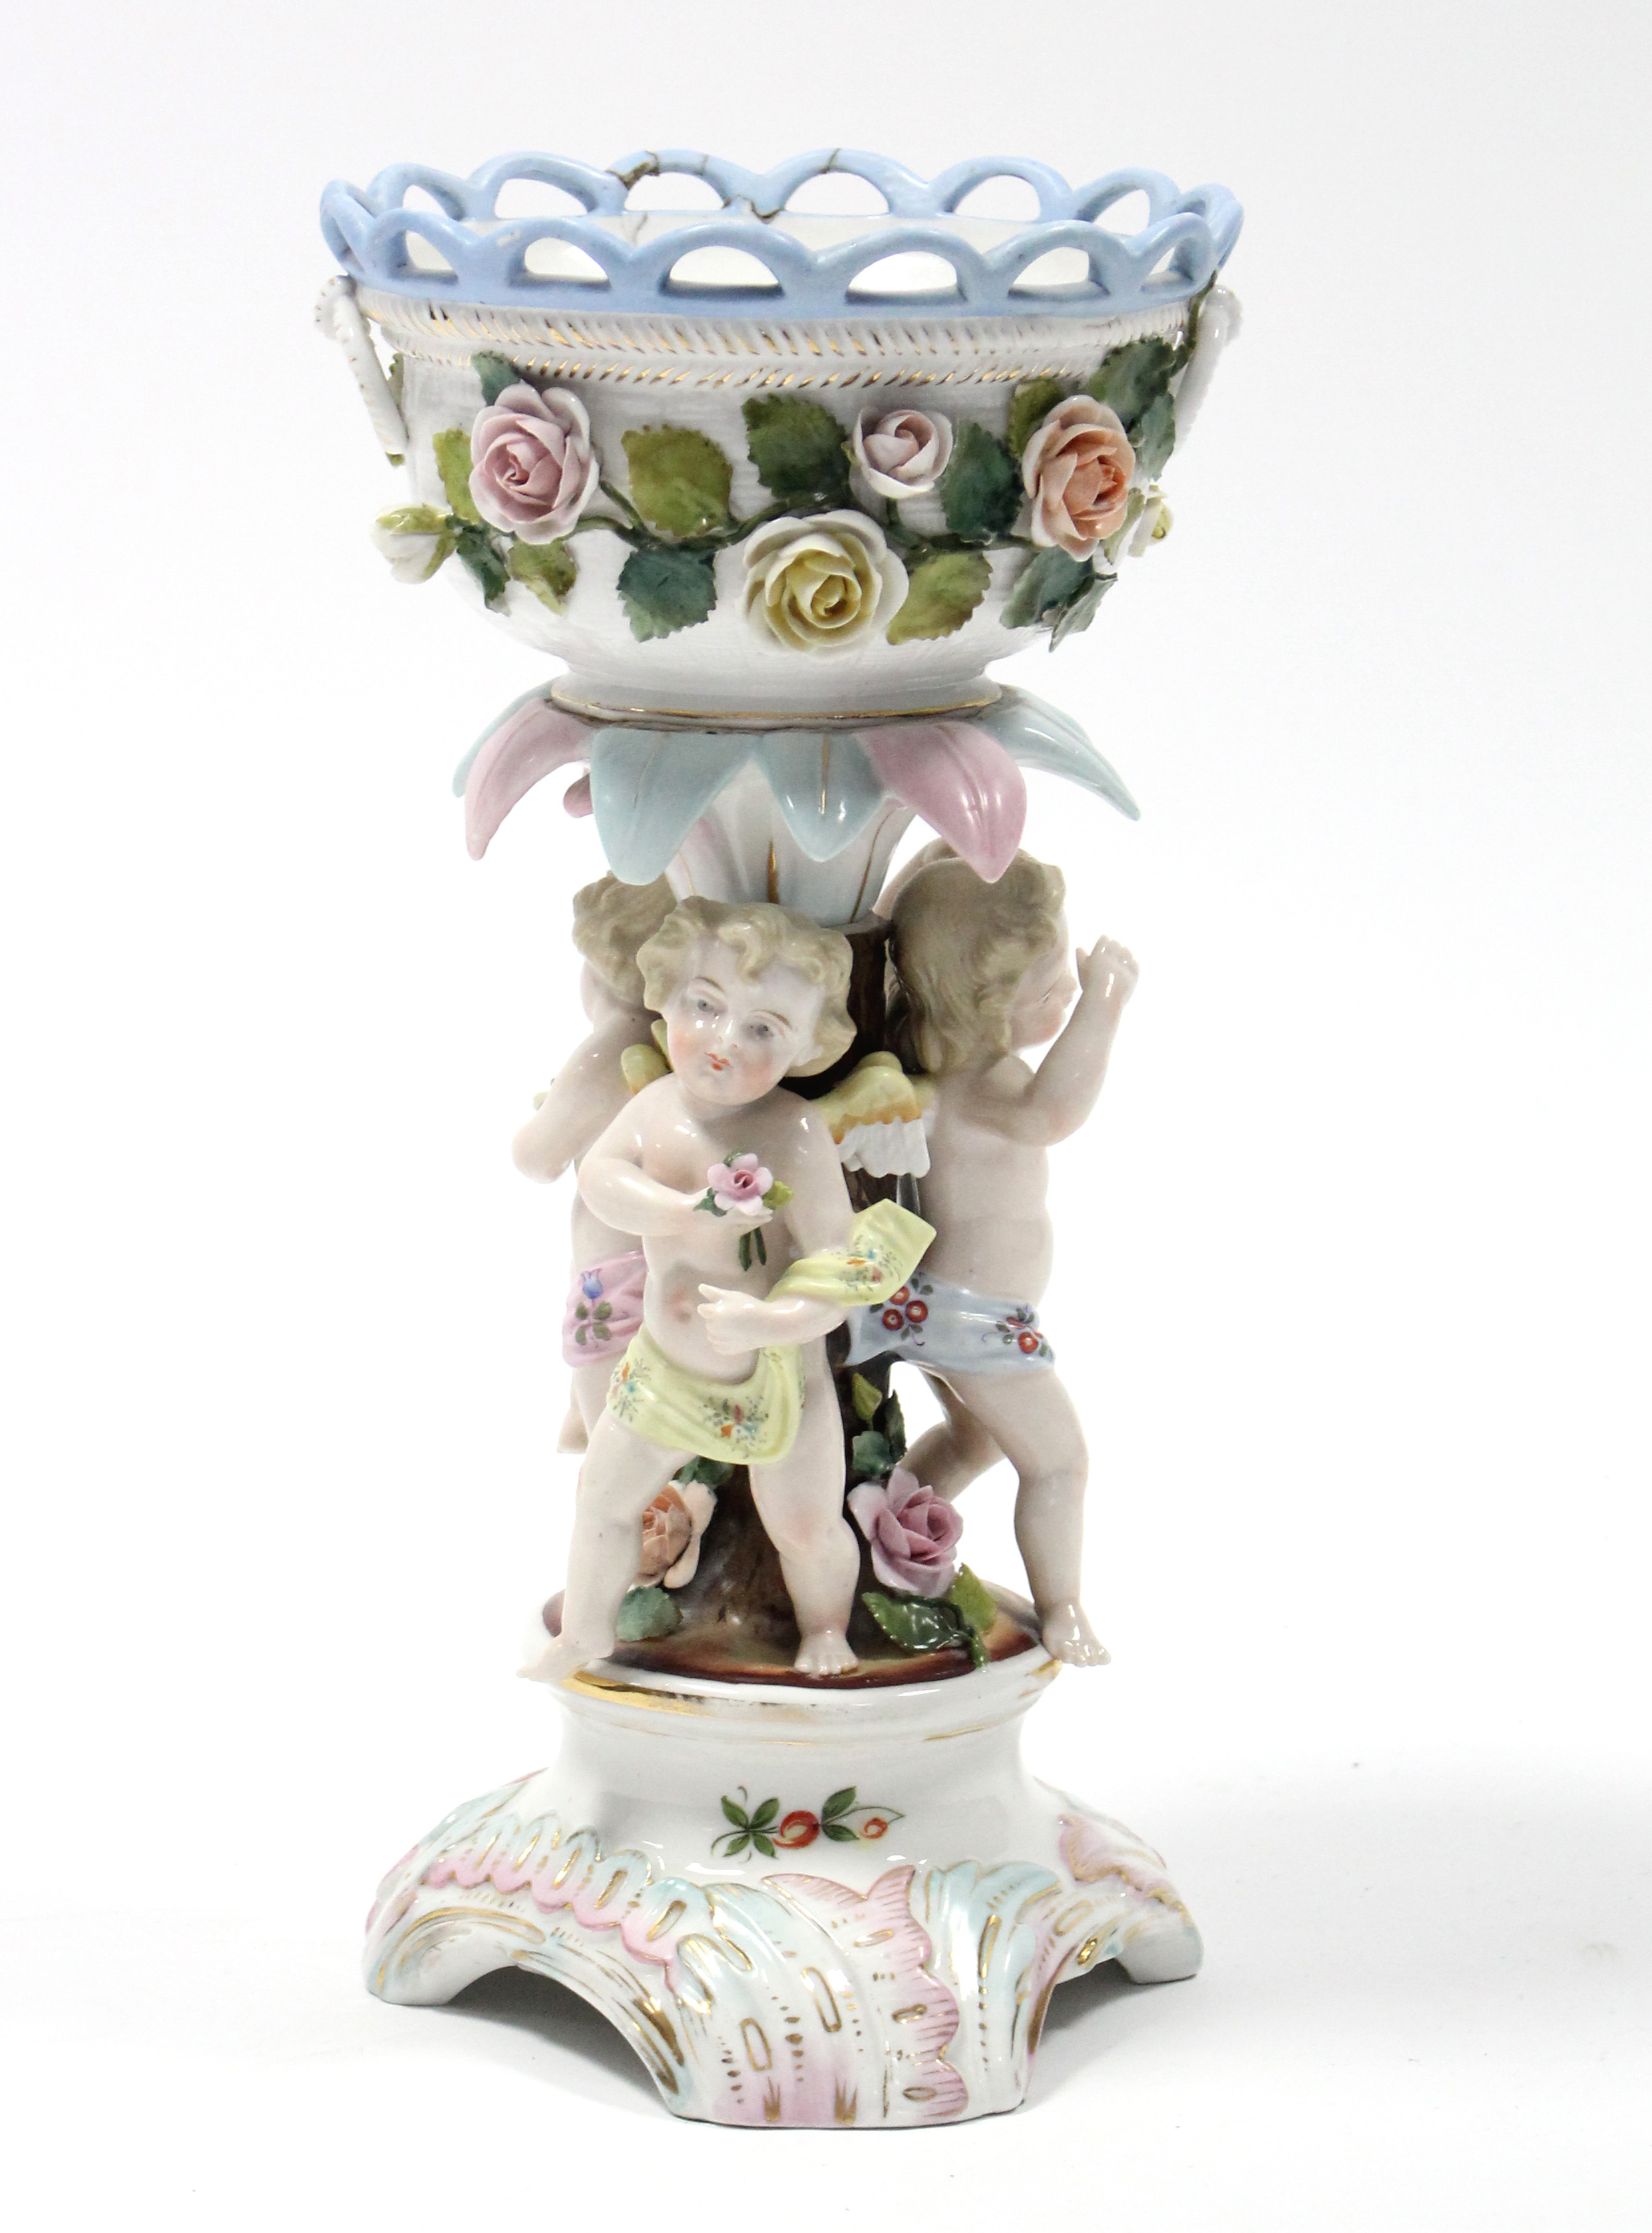 A Sitzendorf porcelain centrepiece with round floral-encrusted bowl supported by three cherubs, on